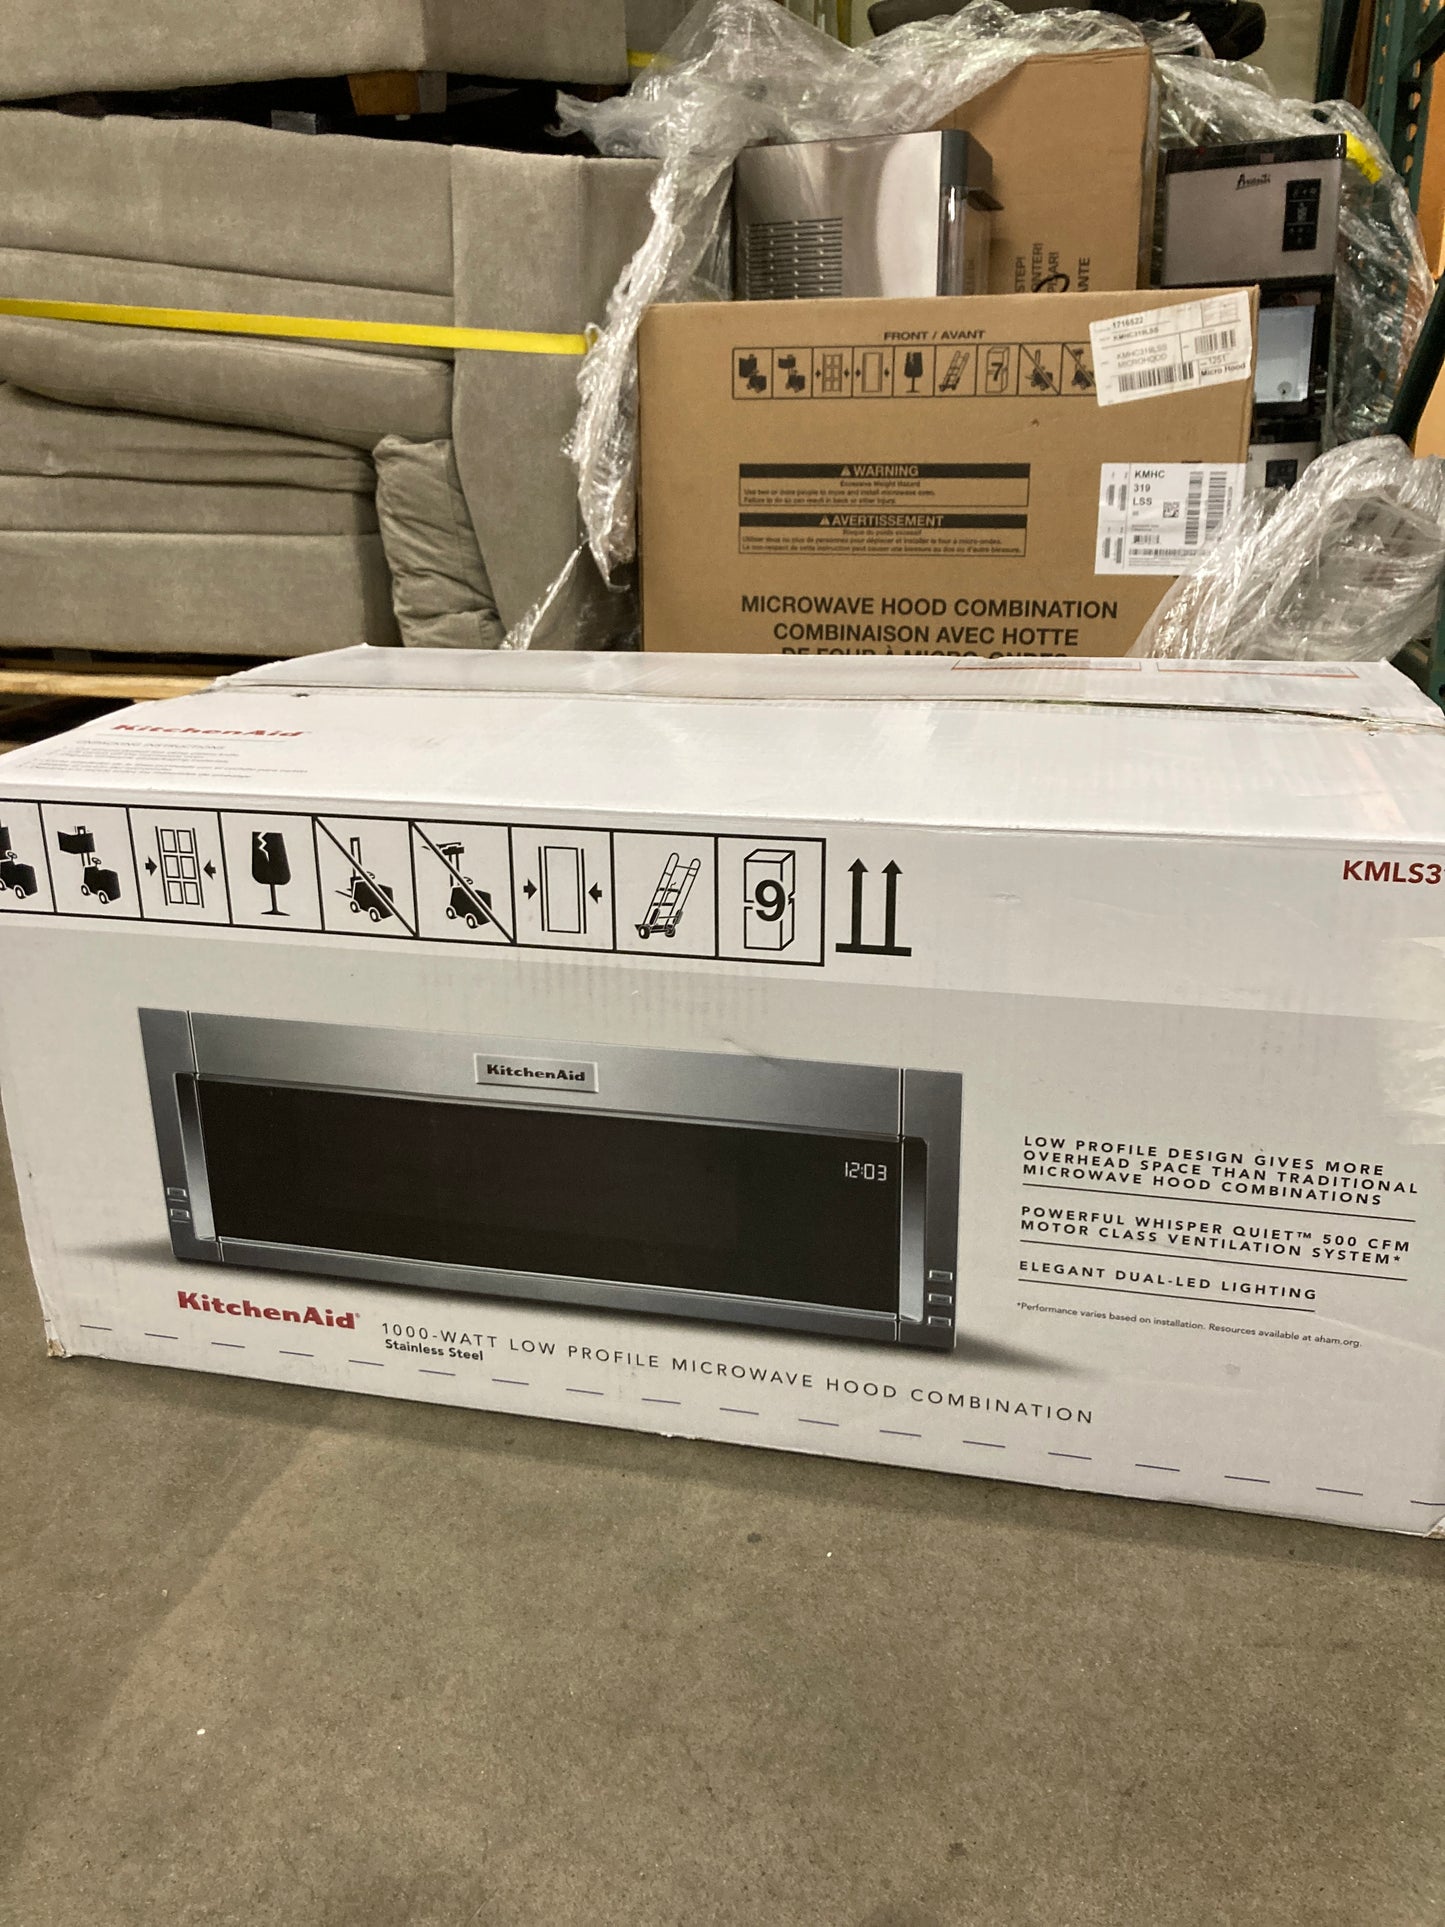 KitchenAid 1.1 cu. ft. Low Profile Over-The-Range Microwave Hood Combination with Whisper Quiet Ventilation System - Retail $699 Default Title